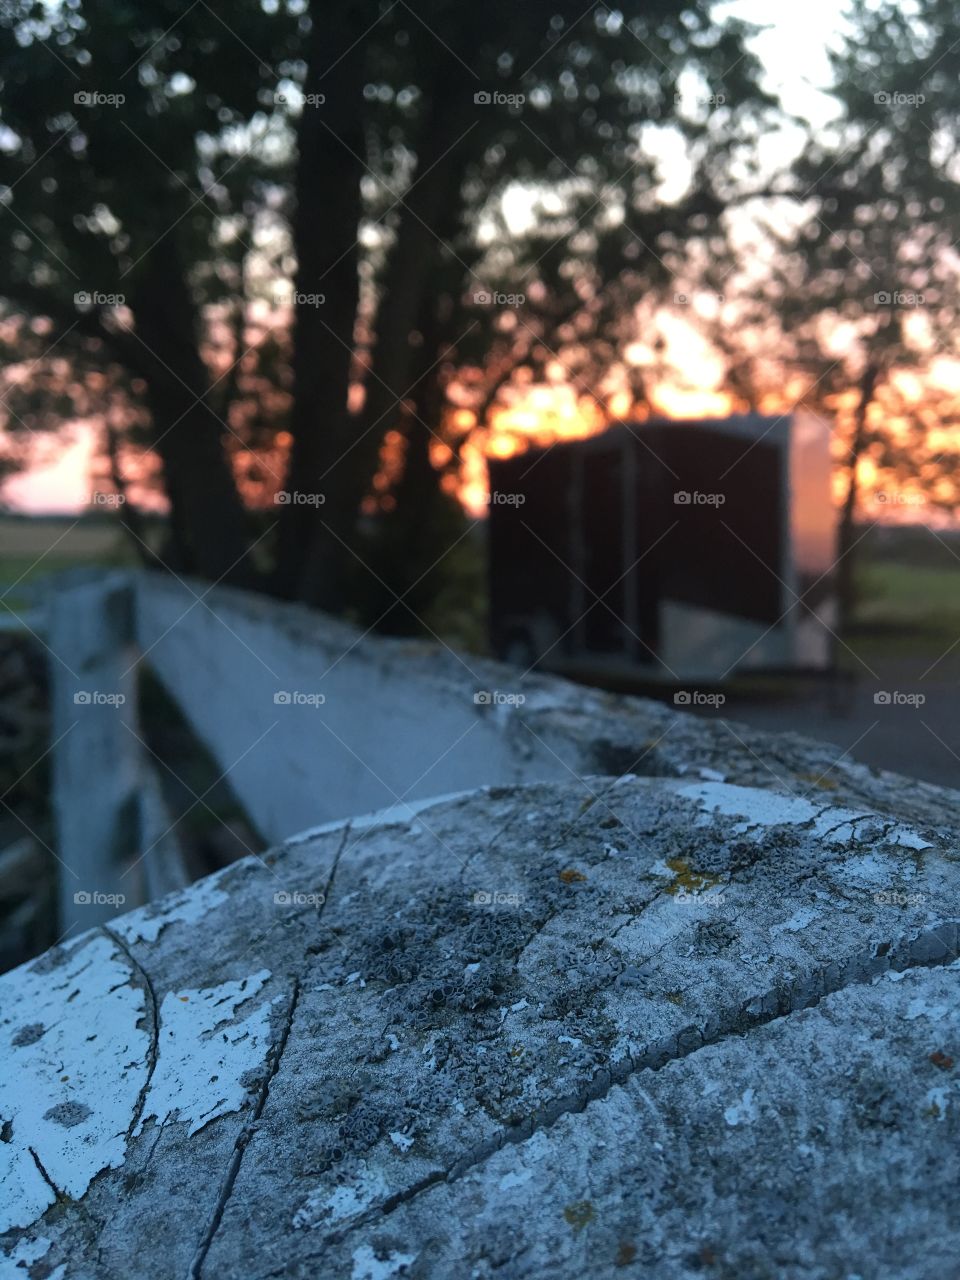 A clear shot of a decaying white picket fence. Fence has tiny specks of moss and fungi. In the background is some luscious green trees and a detached hauling trailer. You can also see yellow/pink hues in the sky from the setting sun.